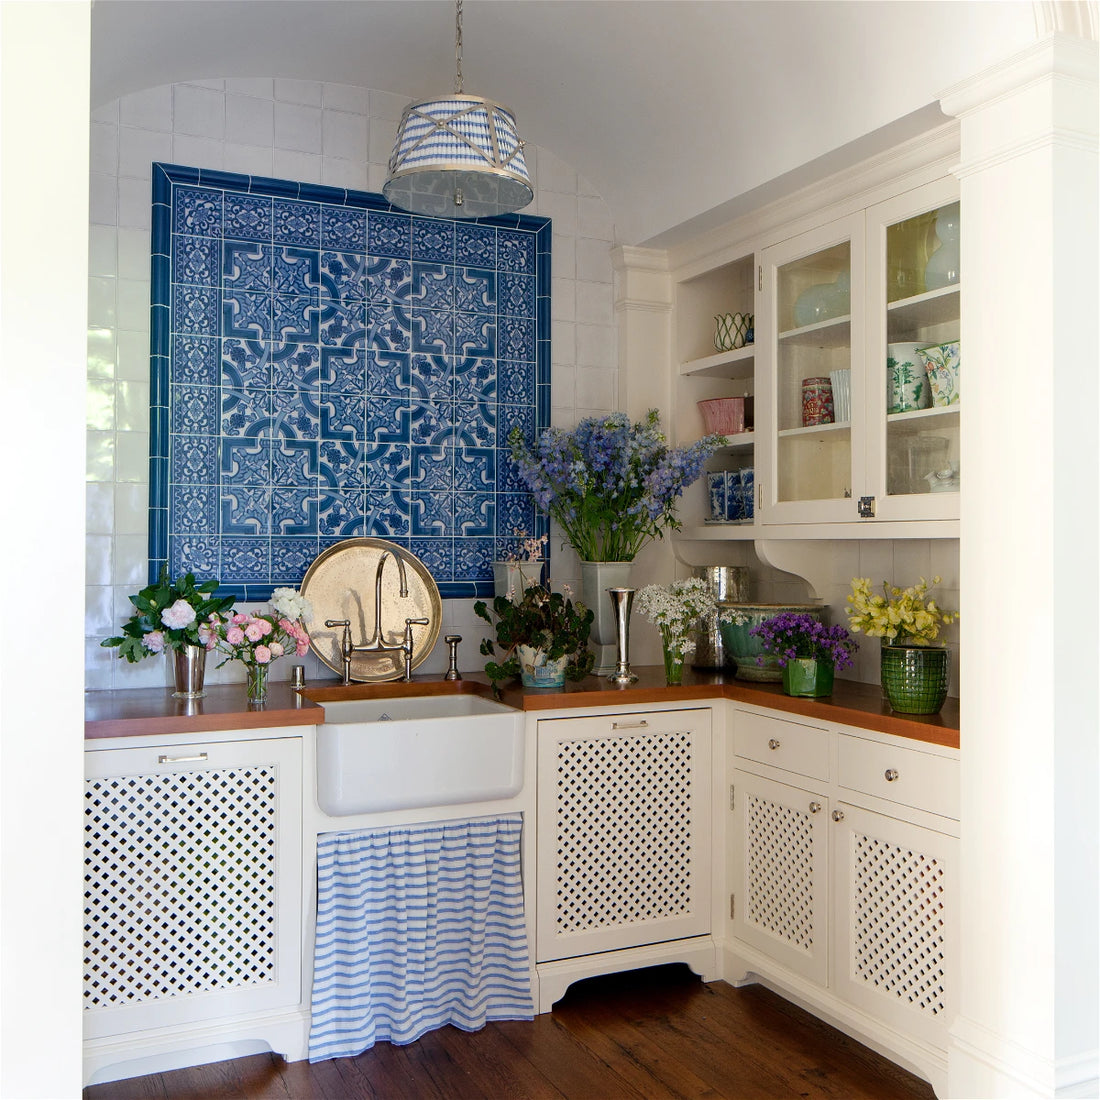 The Concept of Kitchen Cabinet Curtains